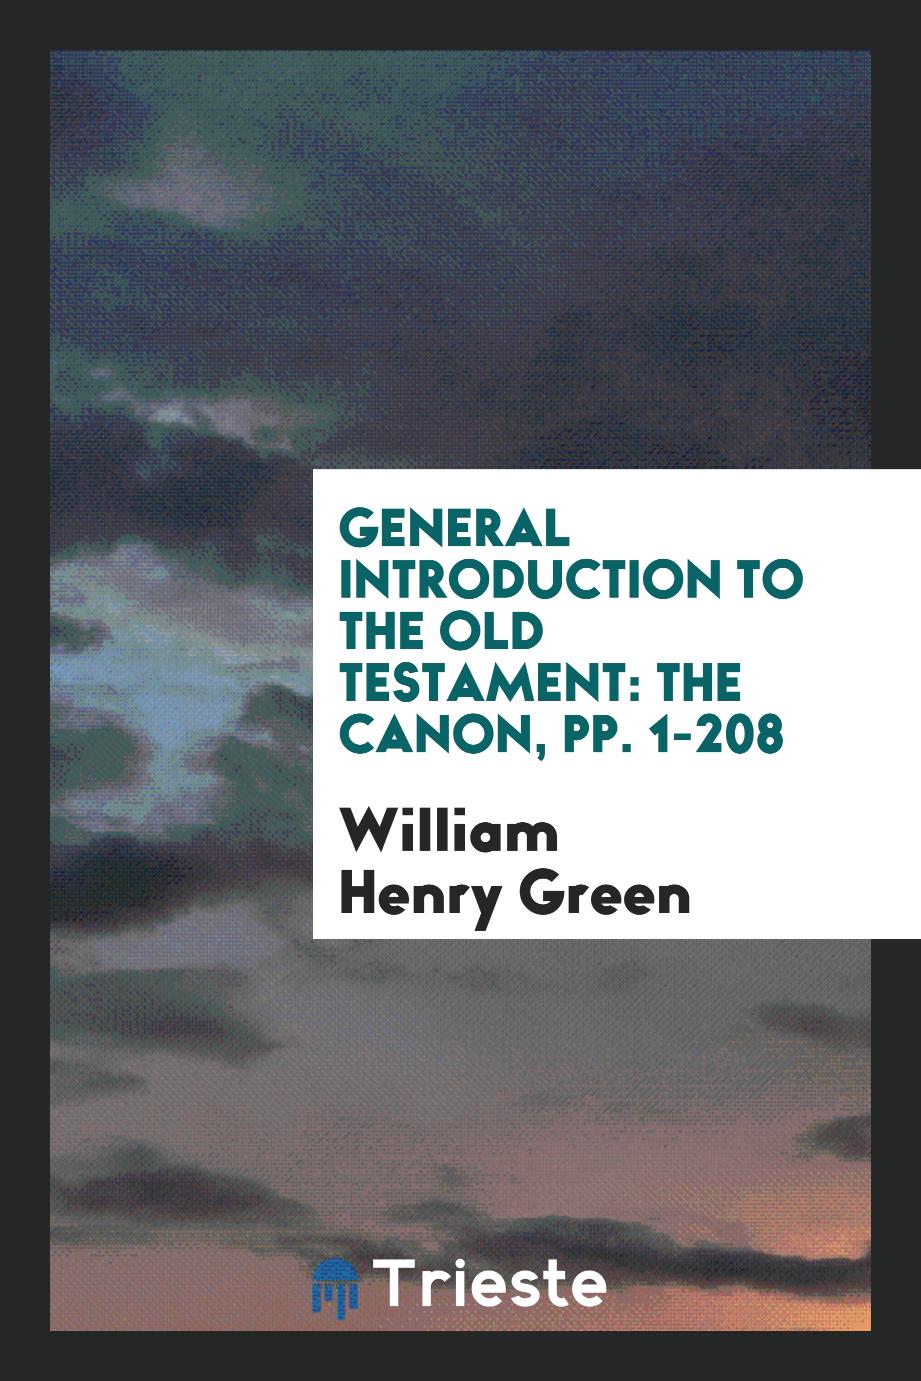 General Introduction to the Old Testament: The Canon, pp. 1-208